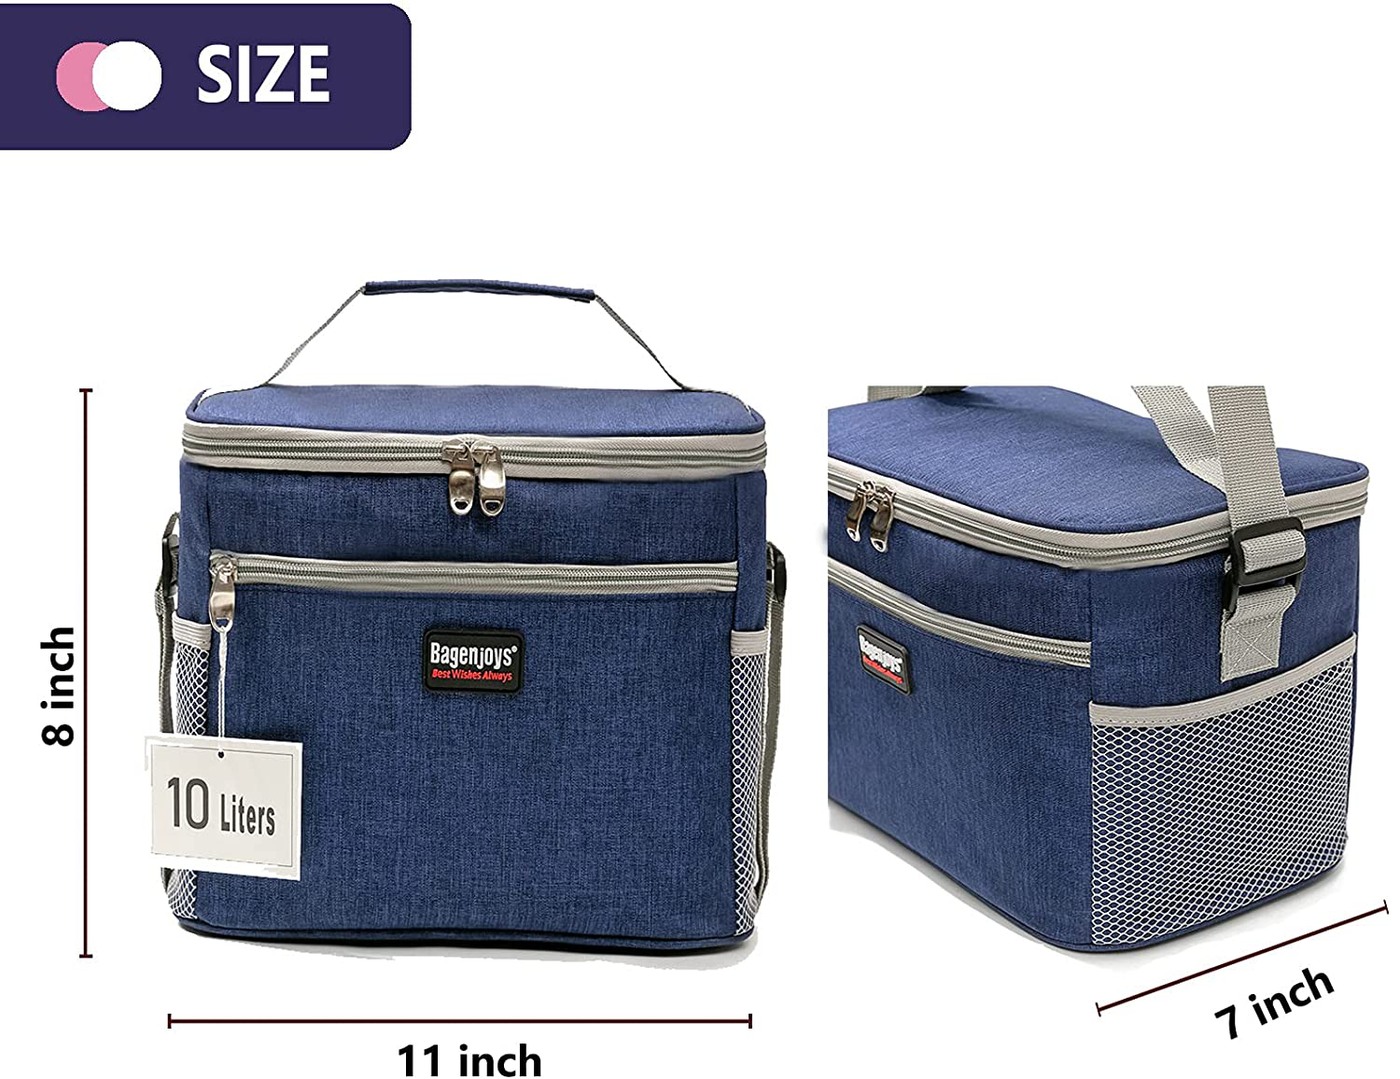 Lunch Bag,Insulated Dual Compartments Lunch Box for Men and Women,Reusable Leakproof Cooler Lunch Bags with Removable shoulder straps,Work Beach Picnic Lunch Boxes-Grey(10L).